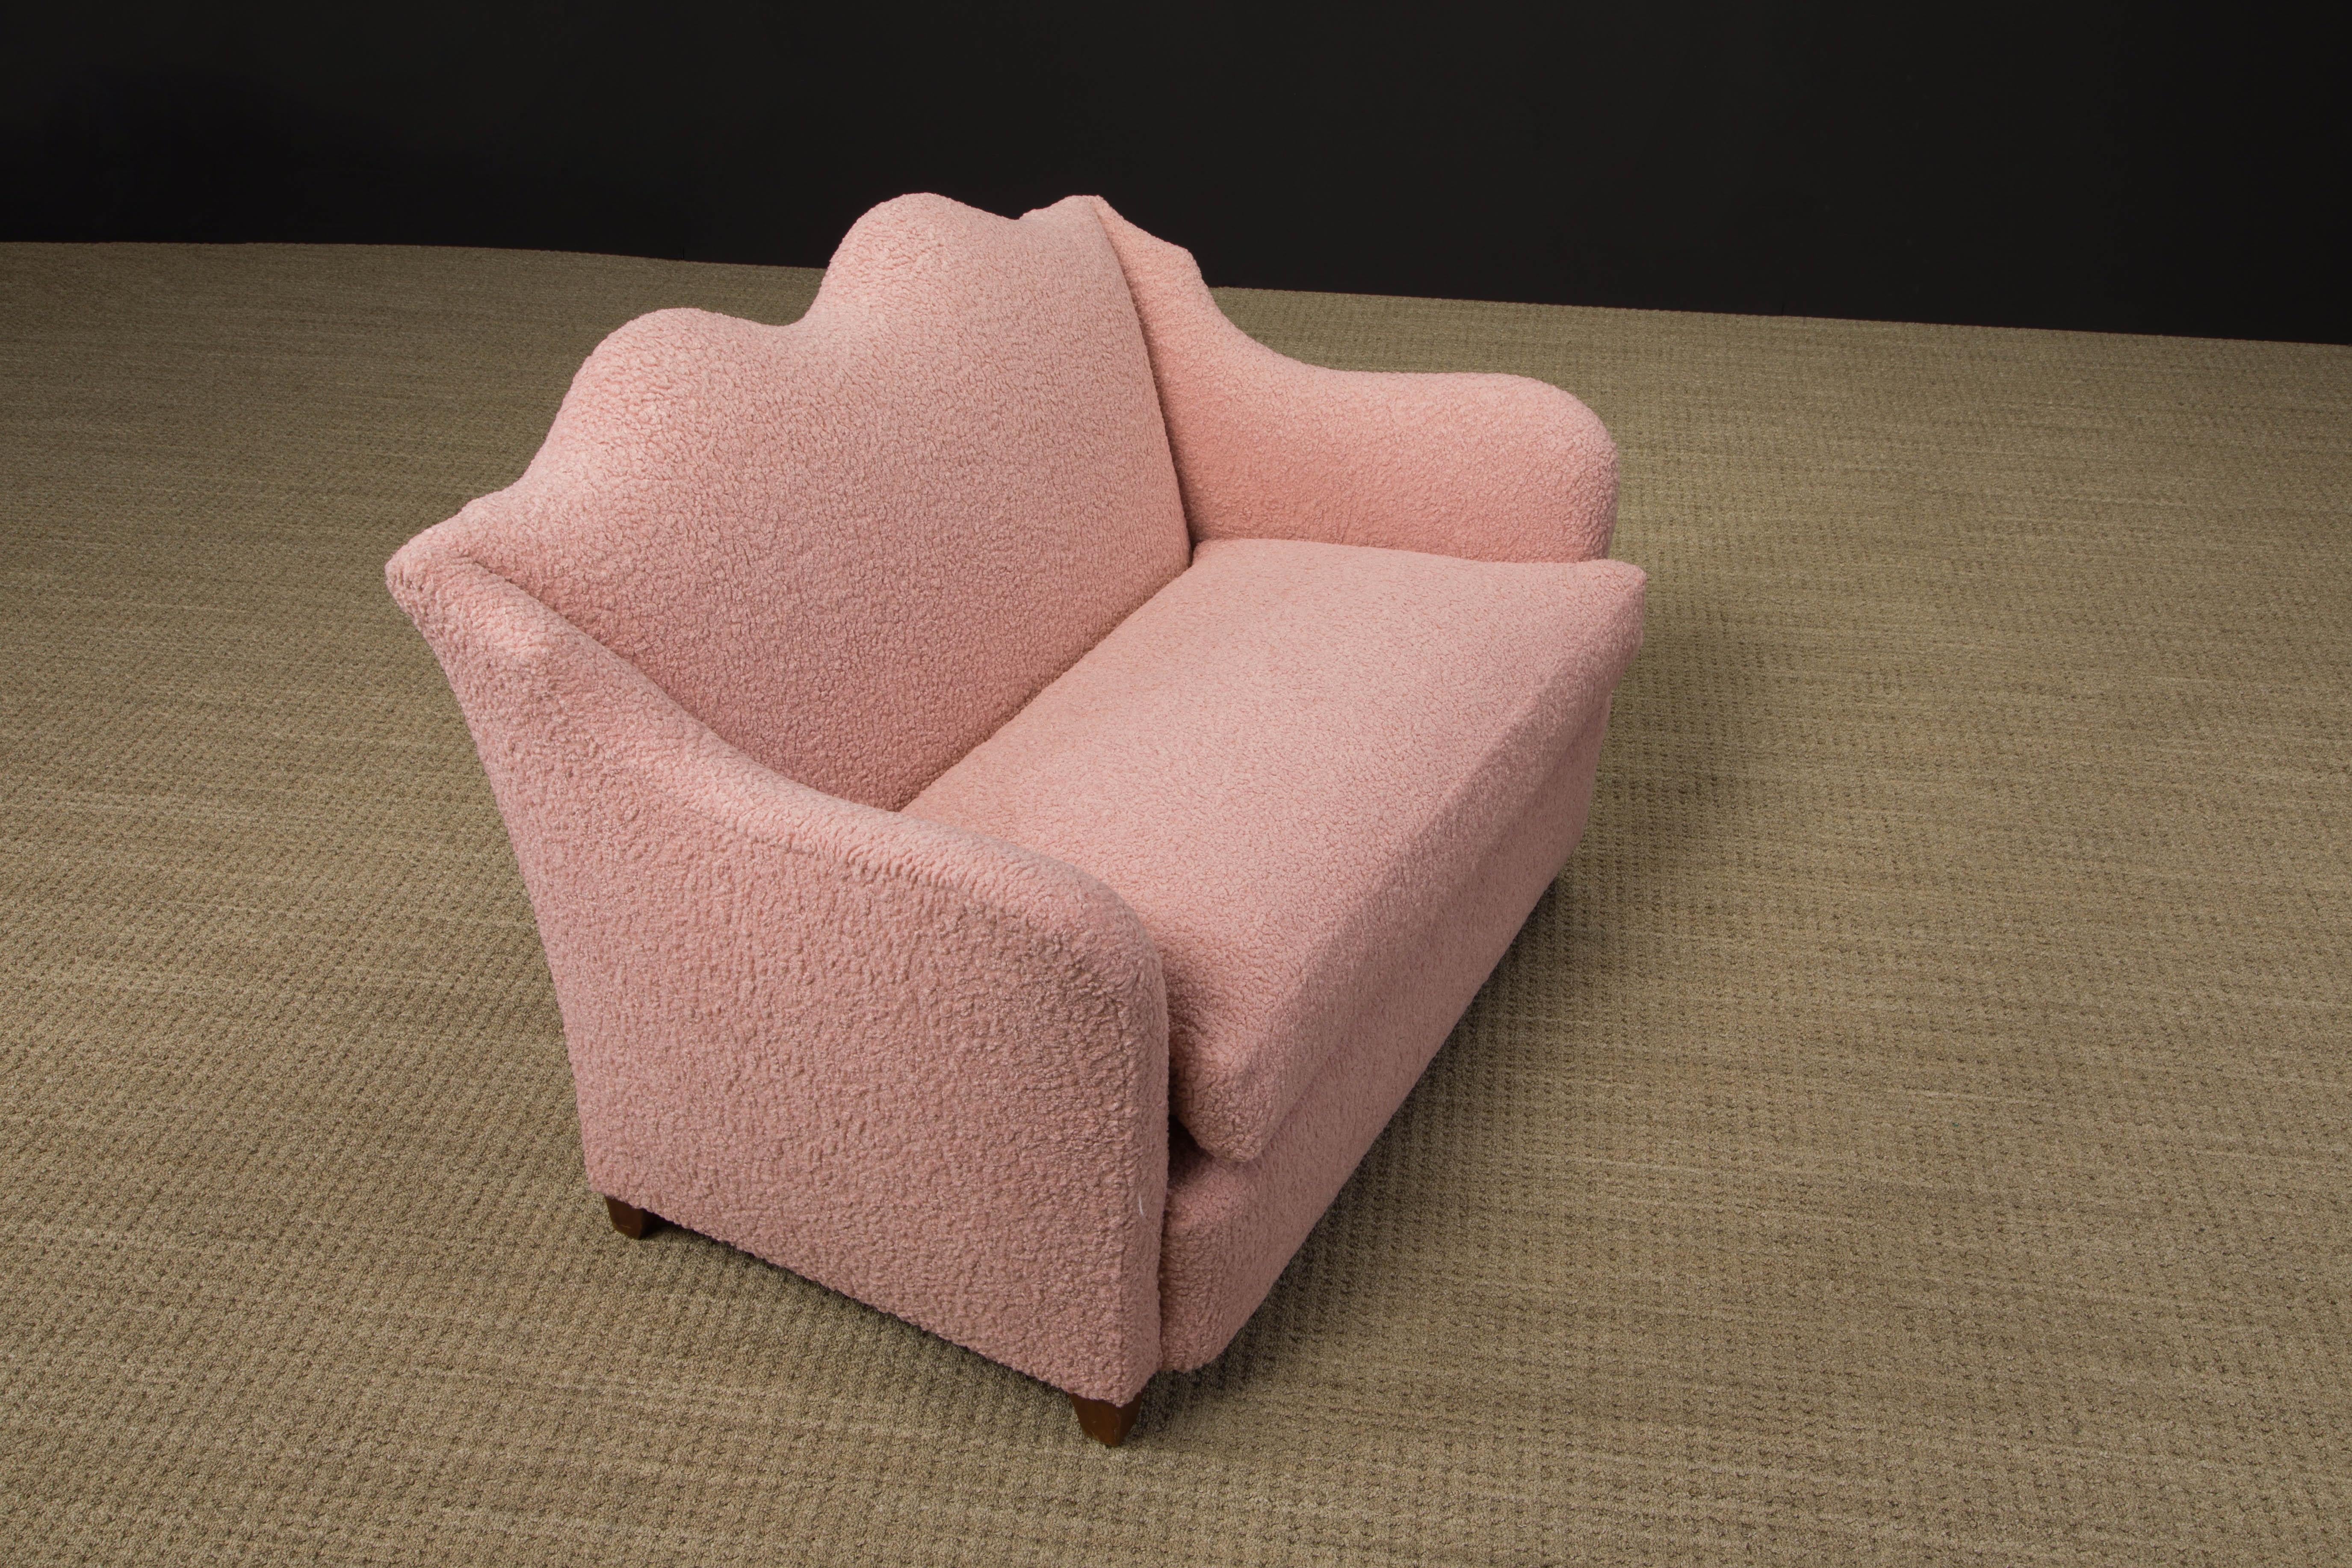 Important Maison Jansen Loveseat Reupholstered in Pink Bouclé, c. 1930s, Signed  For Sale 4